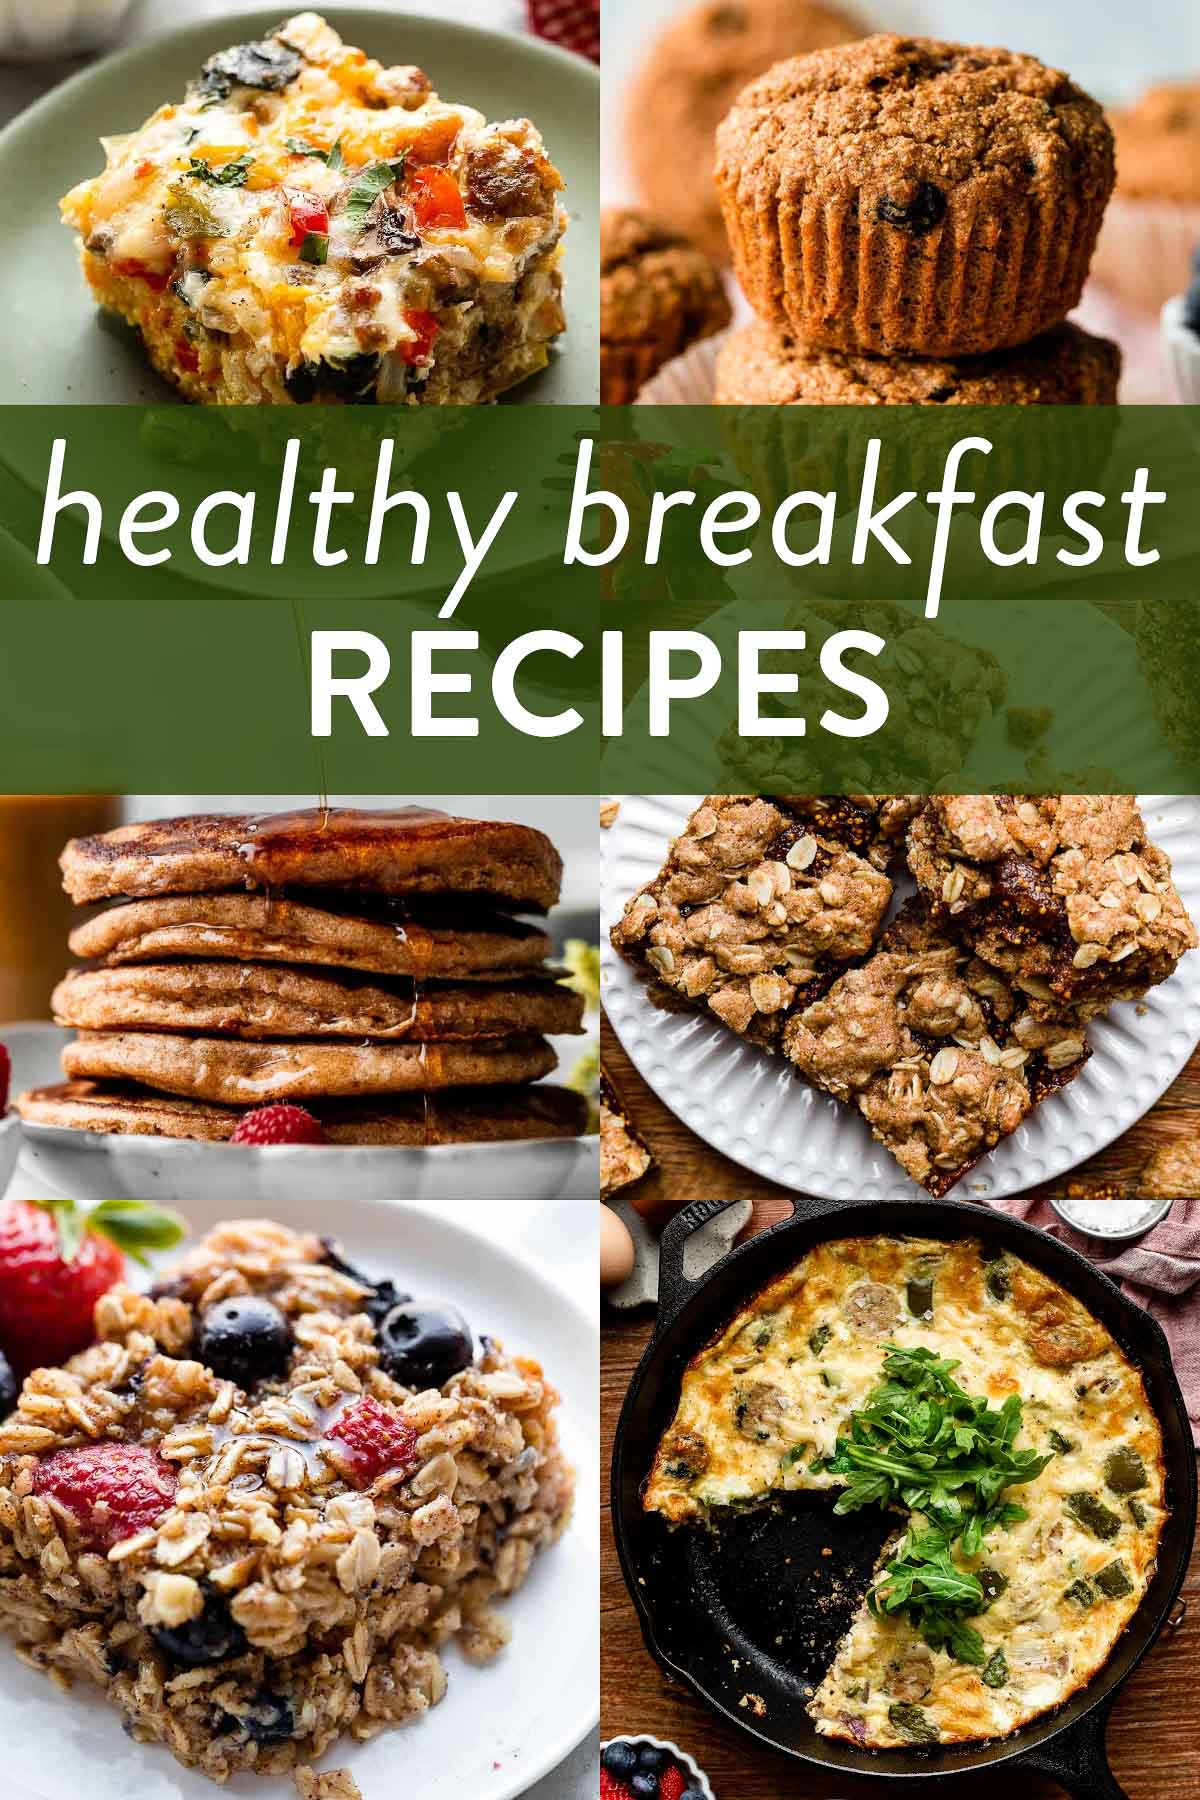 collage of breakfast recipe images including baked oatmeal, breakfast egg casserole, bran muffins, and chicken sausage frittata.